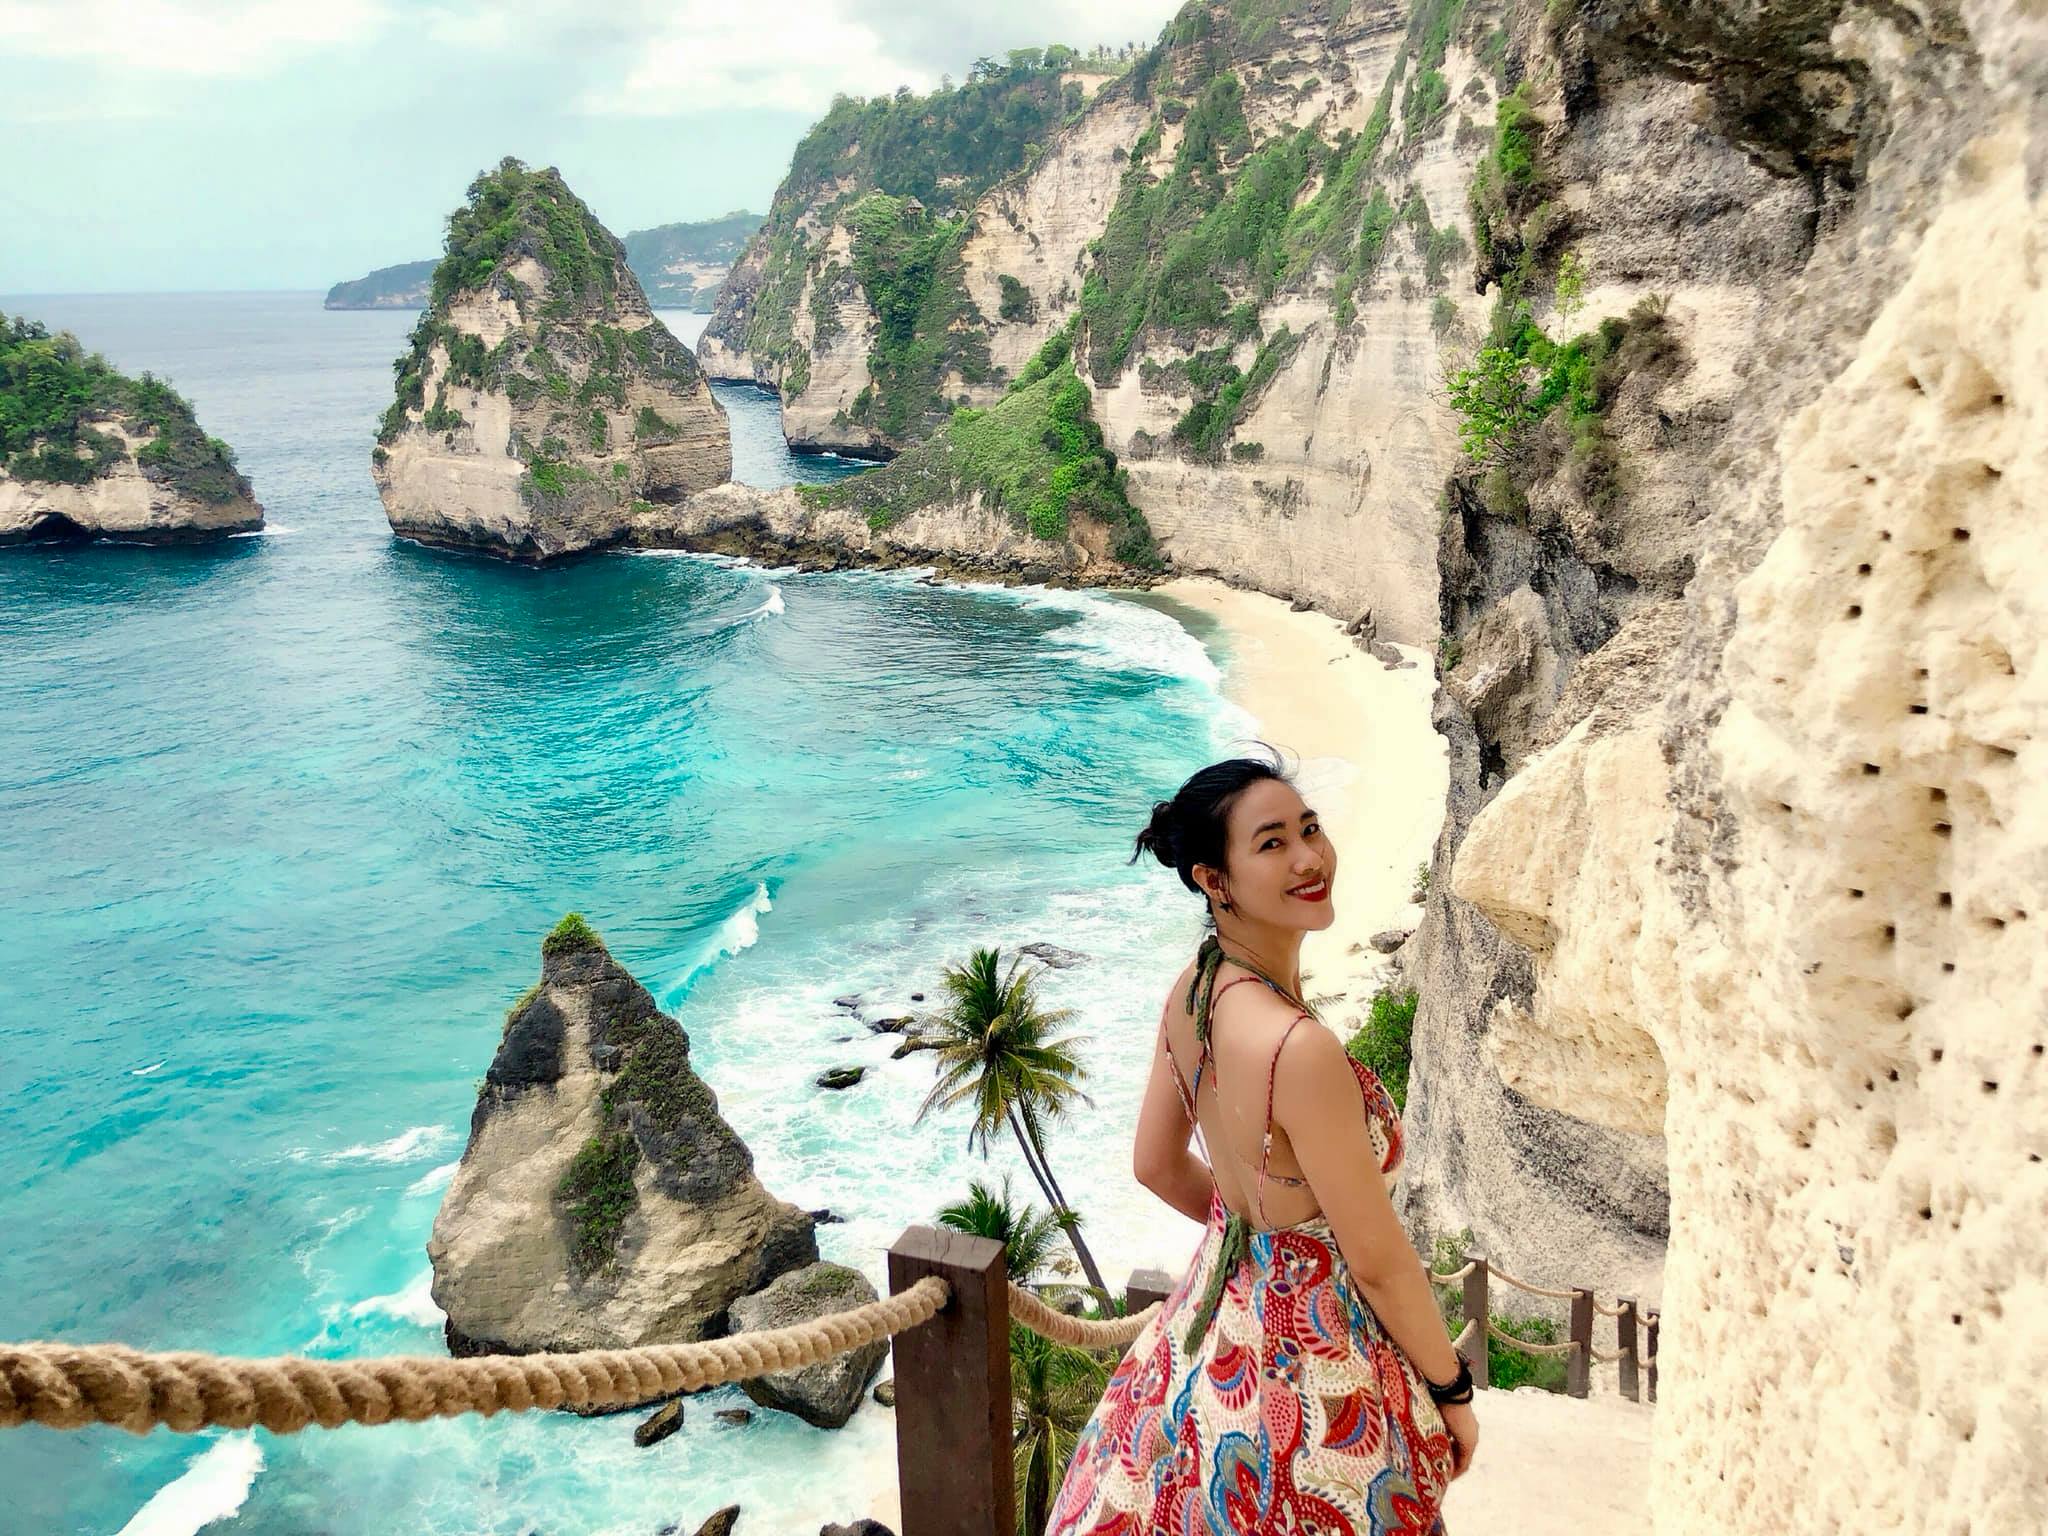 Top 7 photos to take in Bali to spice up your Instagram Feed